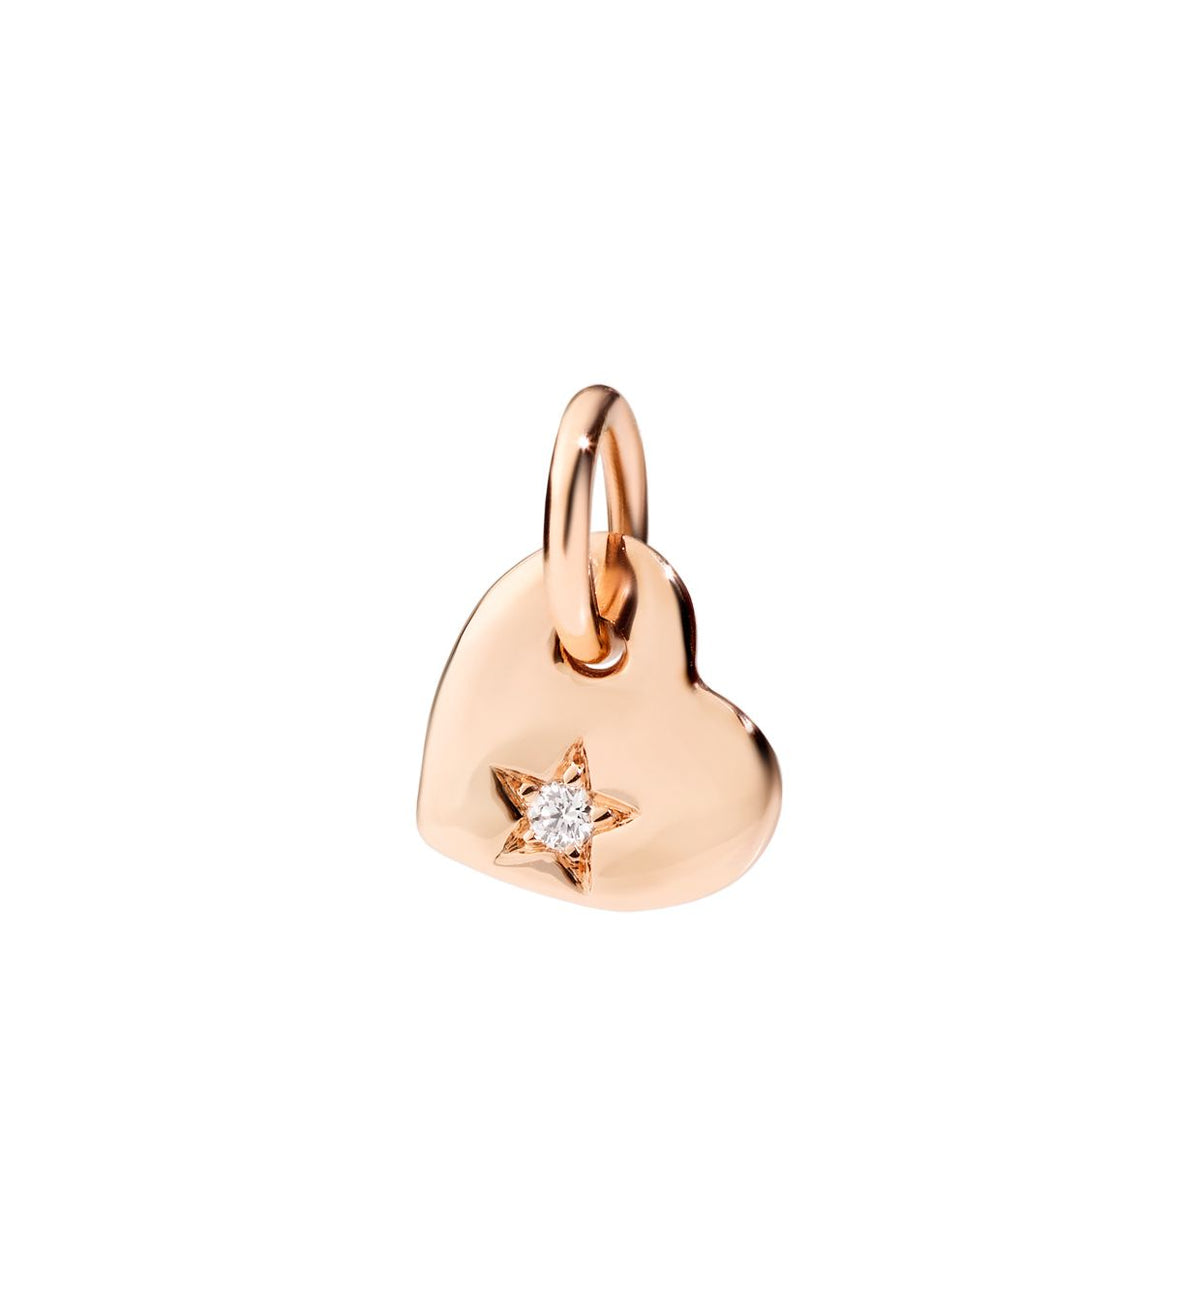 DoDo Heart Charm in 9k Rose Gold with a White Diamond - Orsini Jewellers NZ